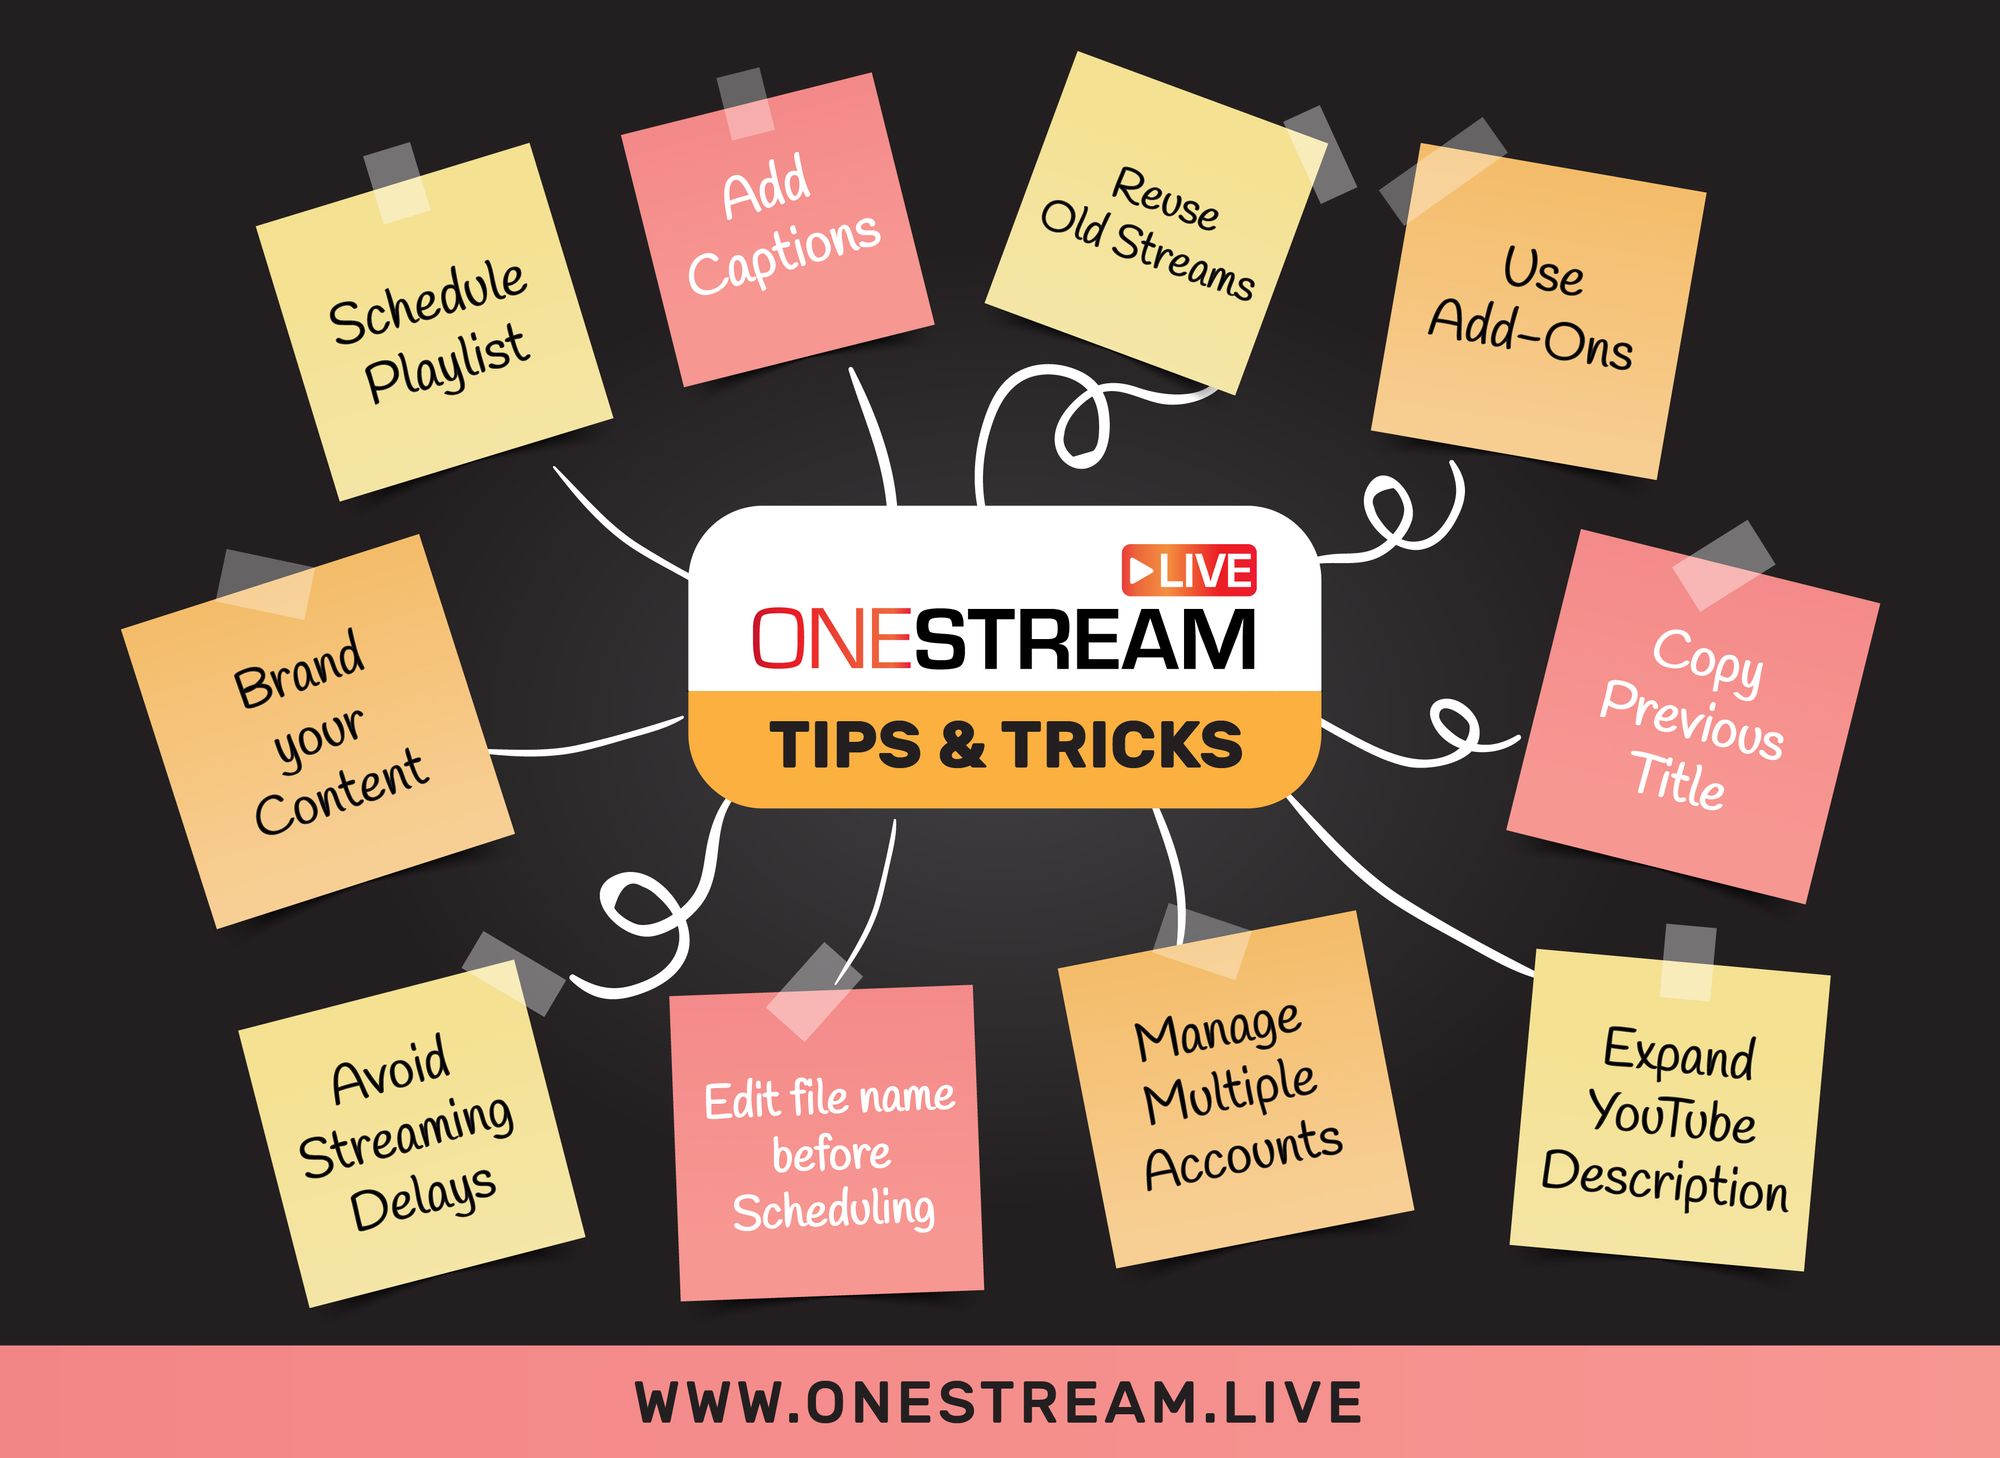 How to Use OneStream Live - Tips & Trick 2021